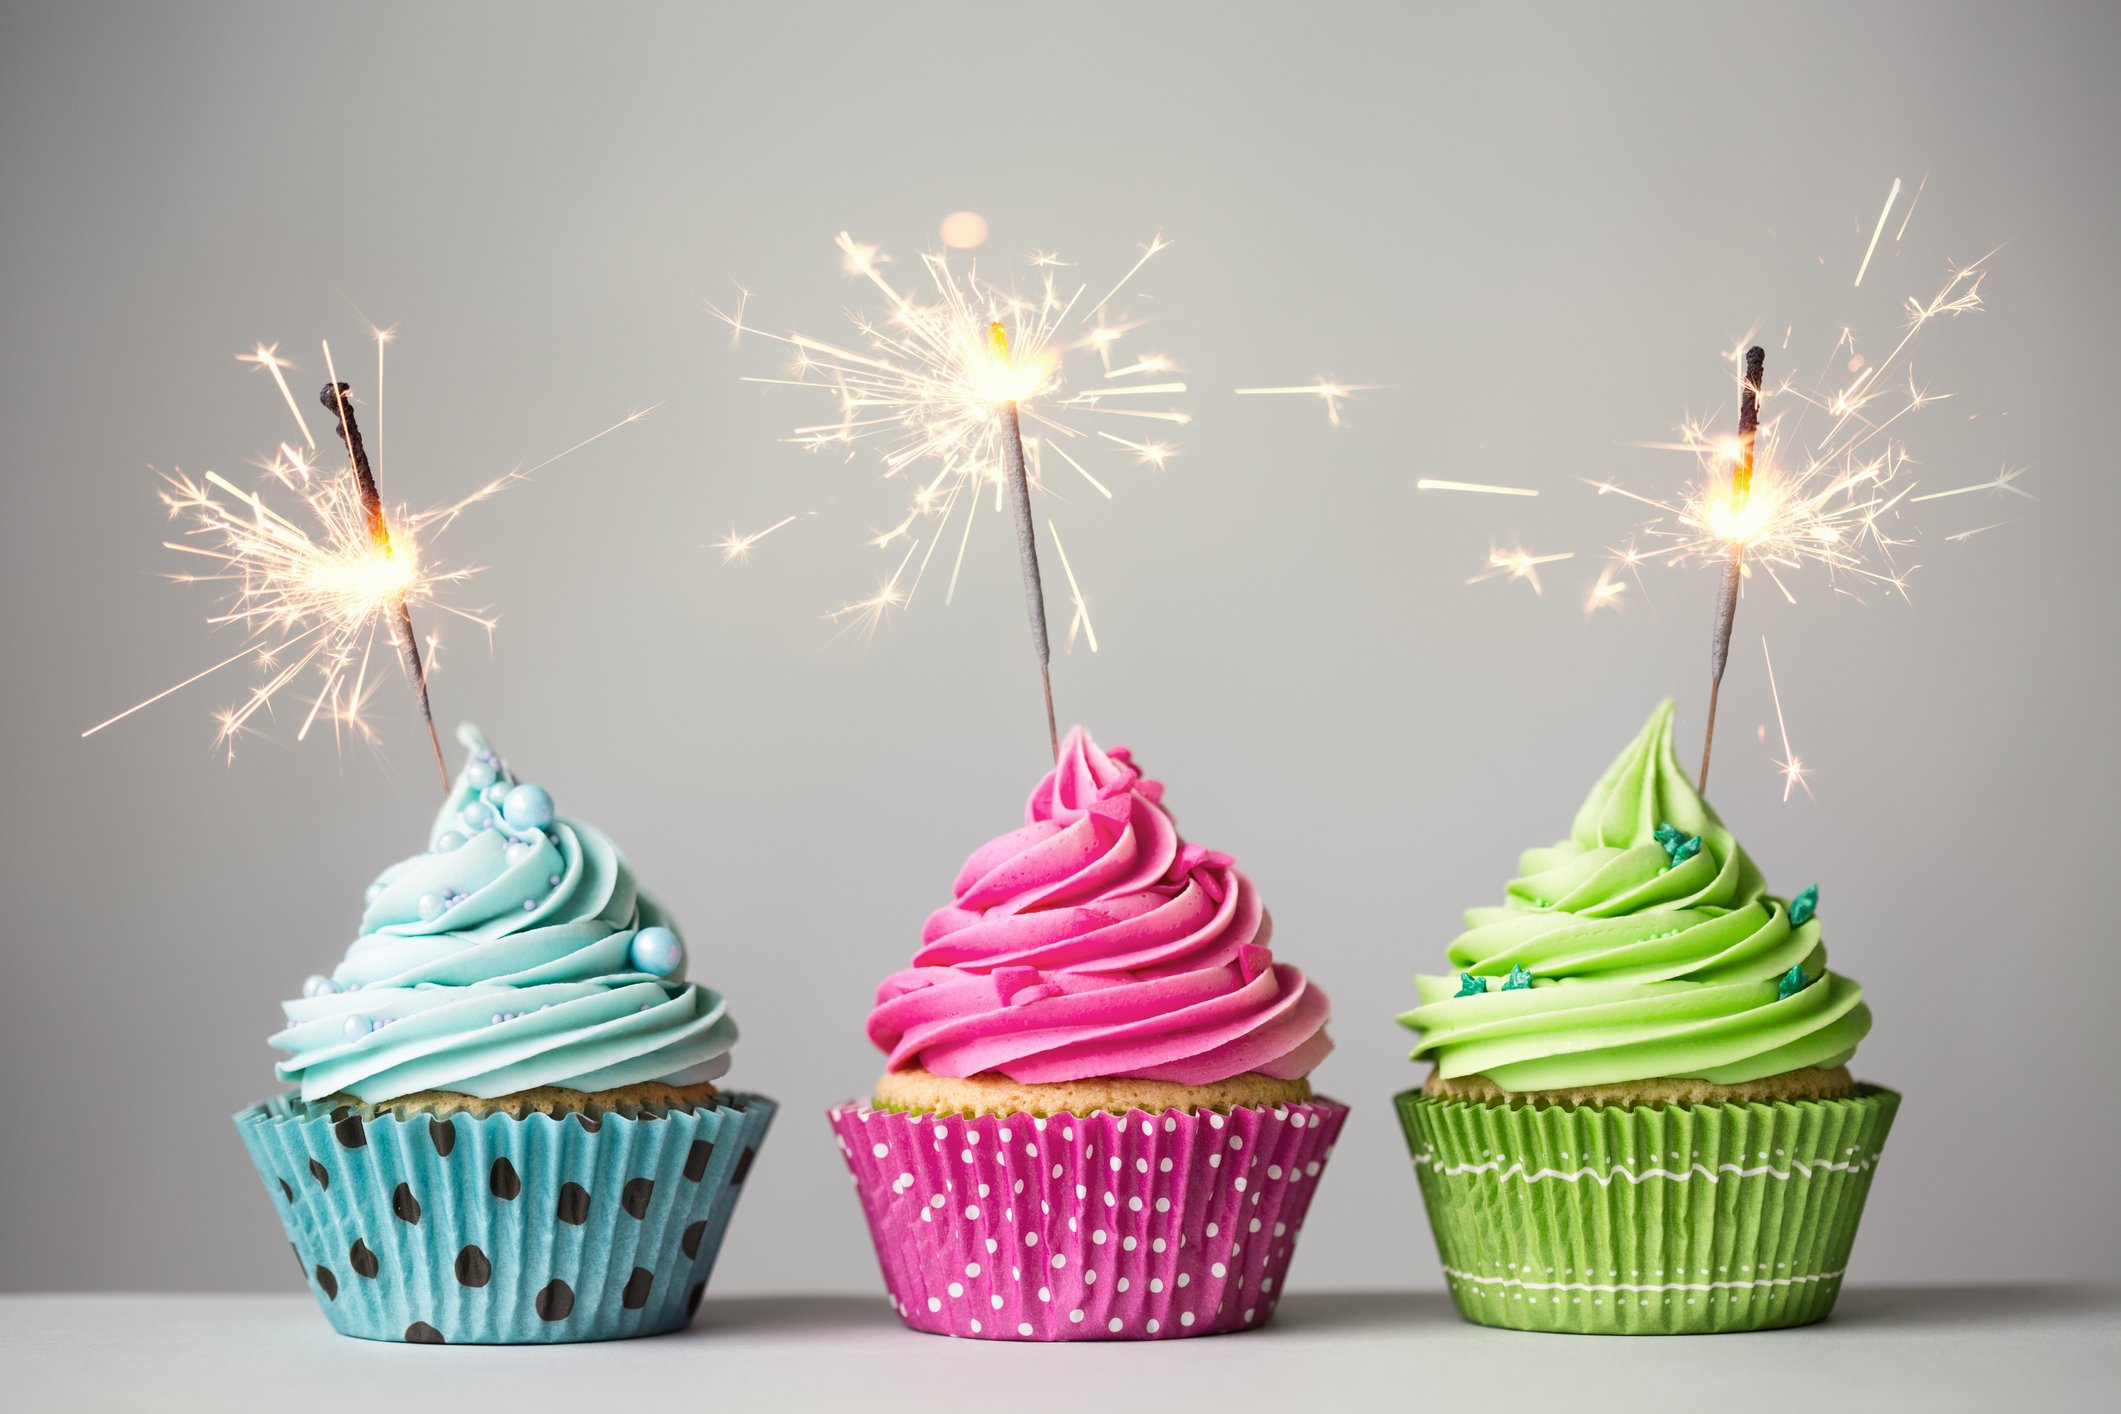 B.A. Schrock Financial Group | Three Birthday Milestones That Could Change Your Tax Situation